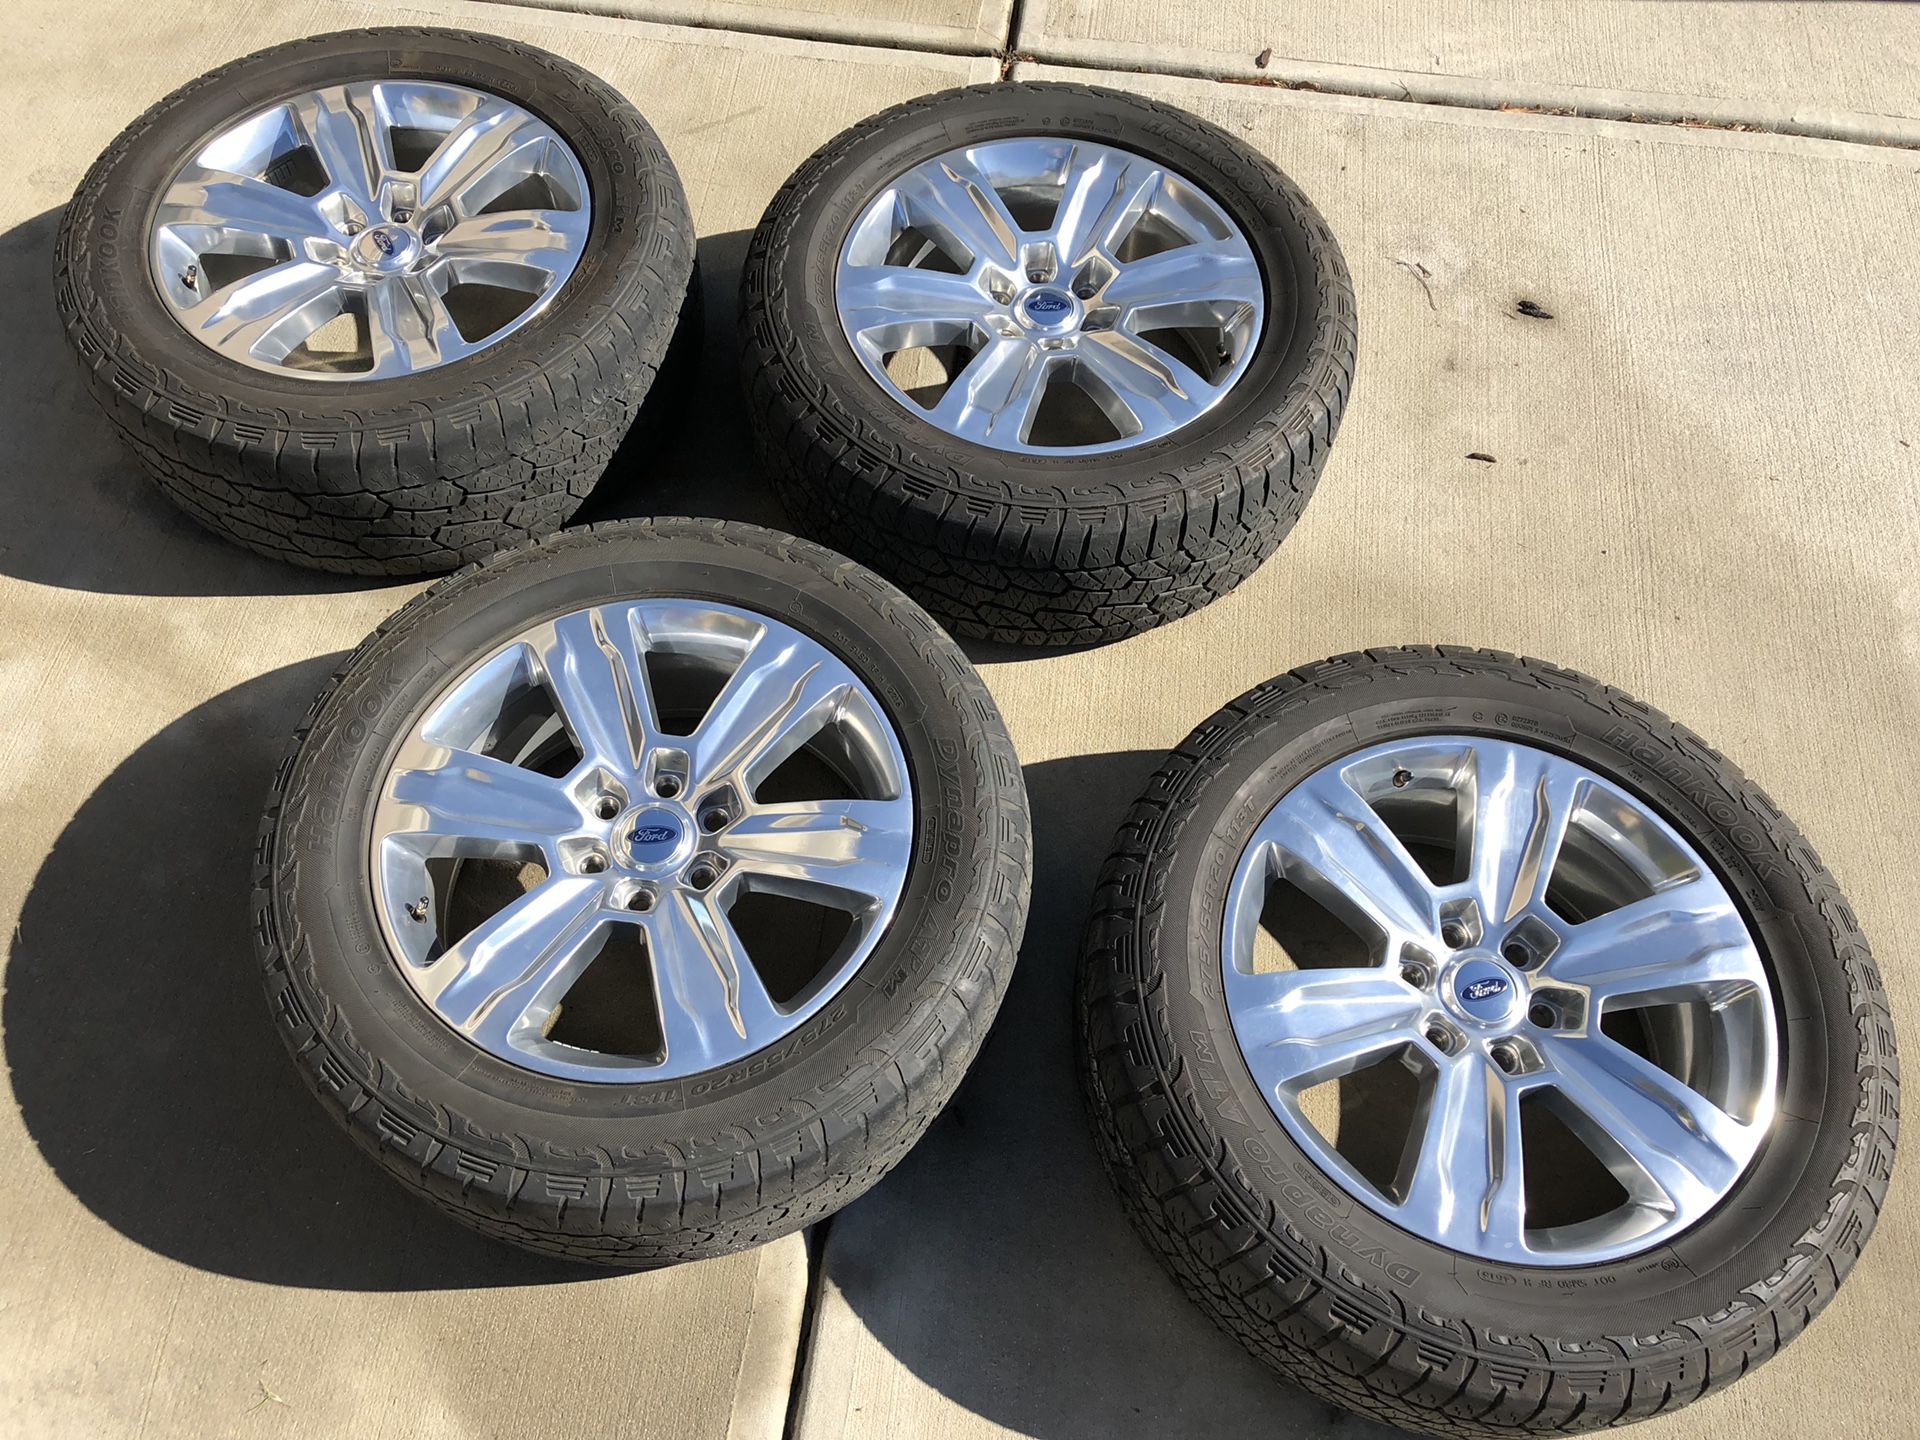 Ford F-150 Platinum 20” Wheels and Tires